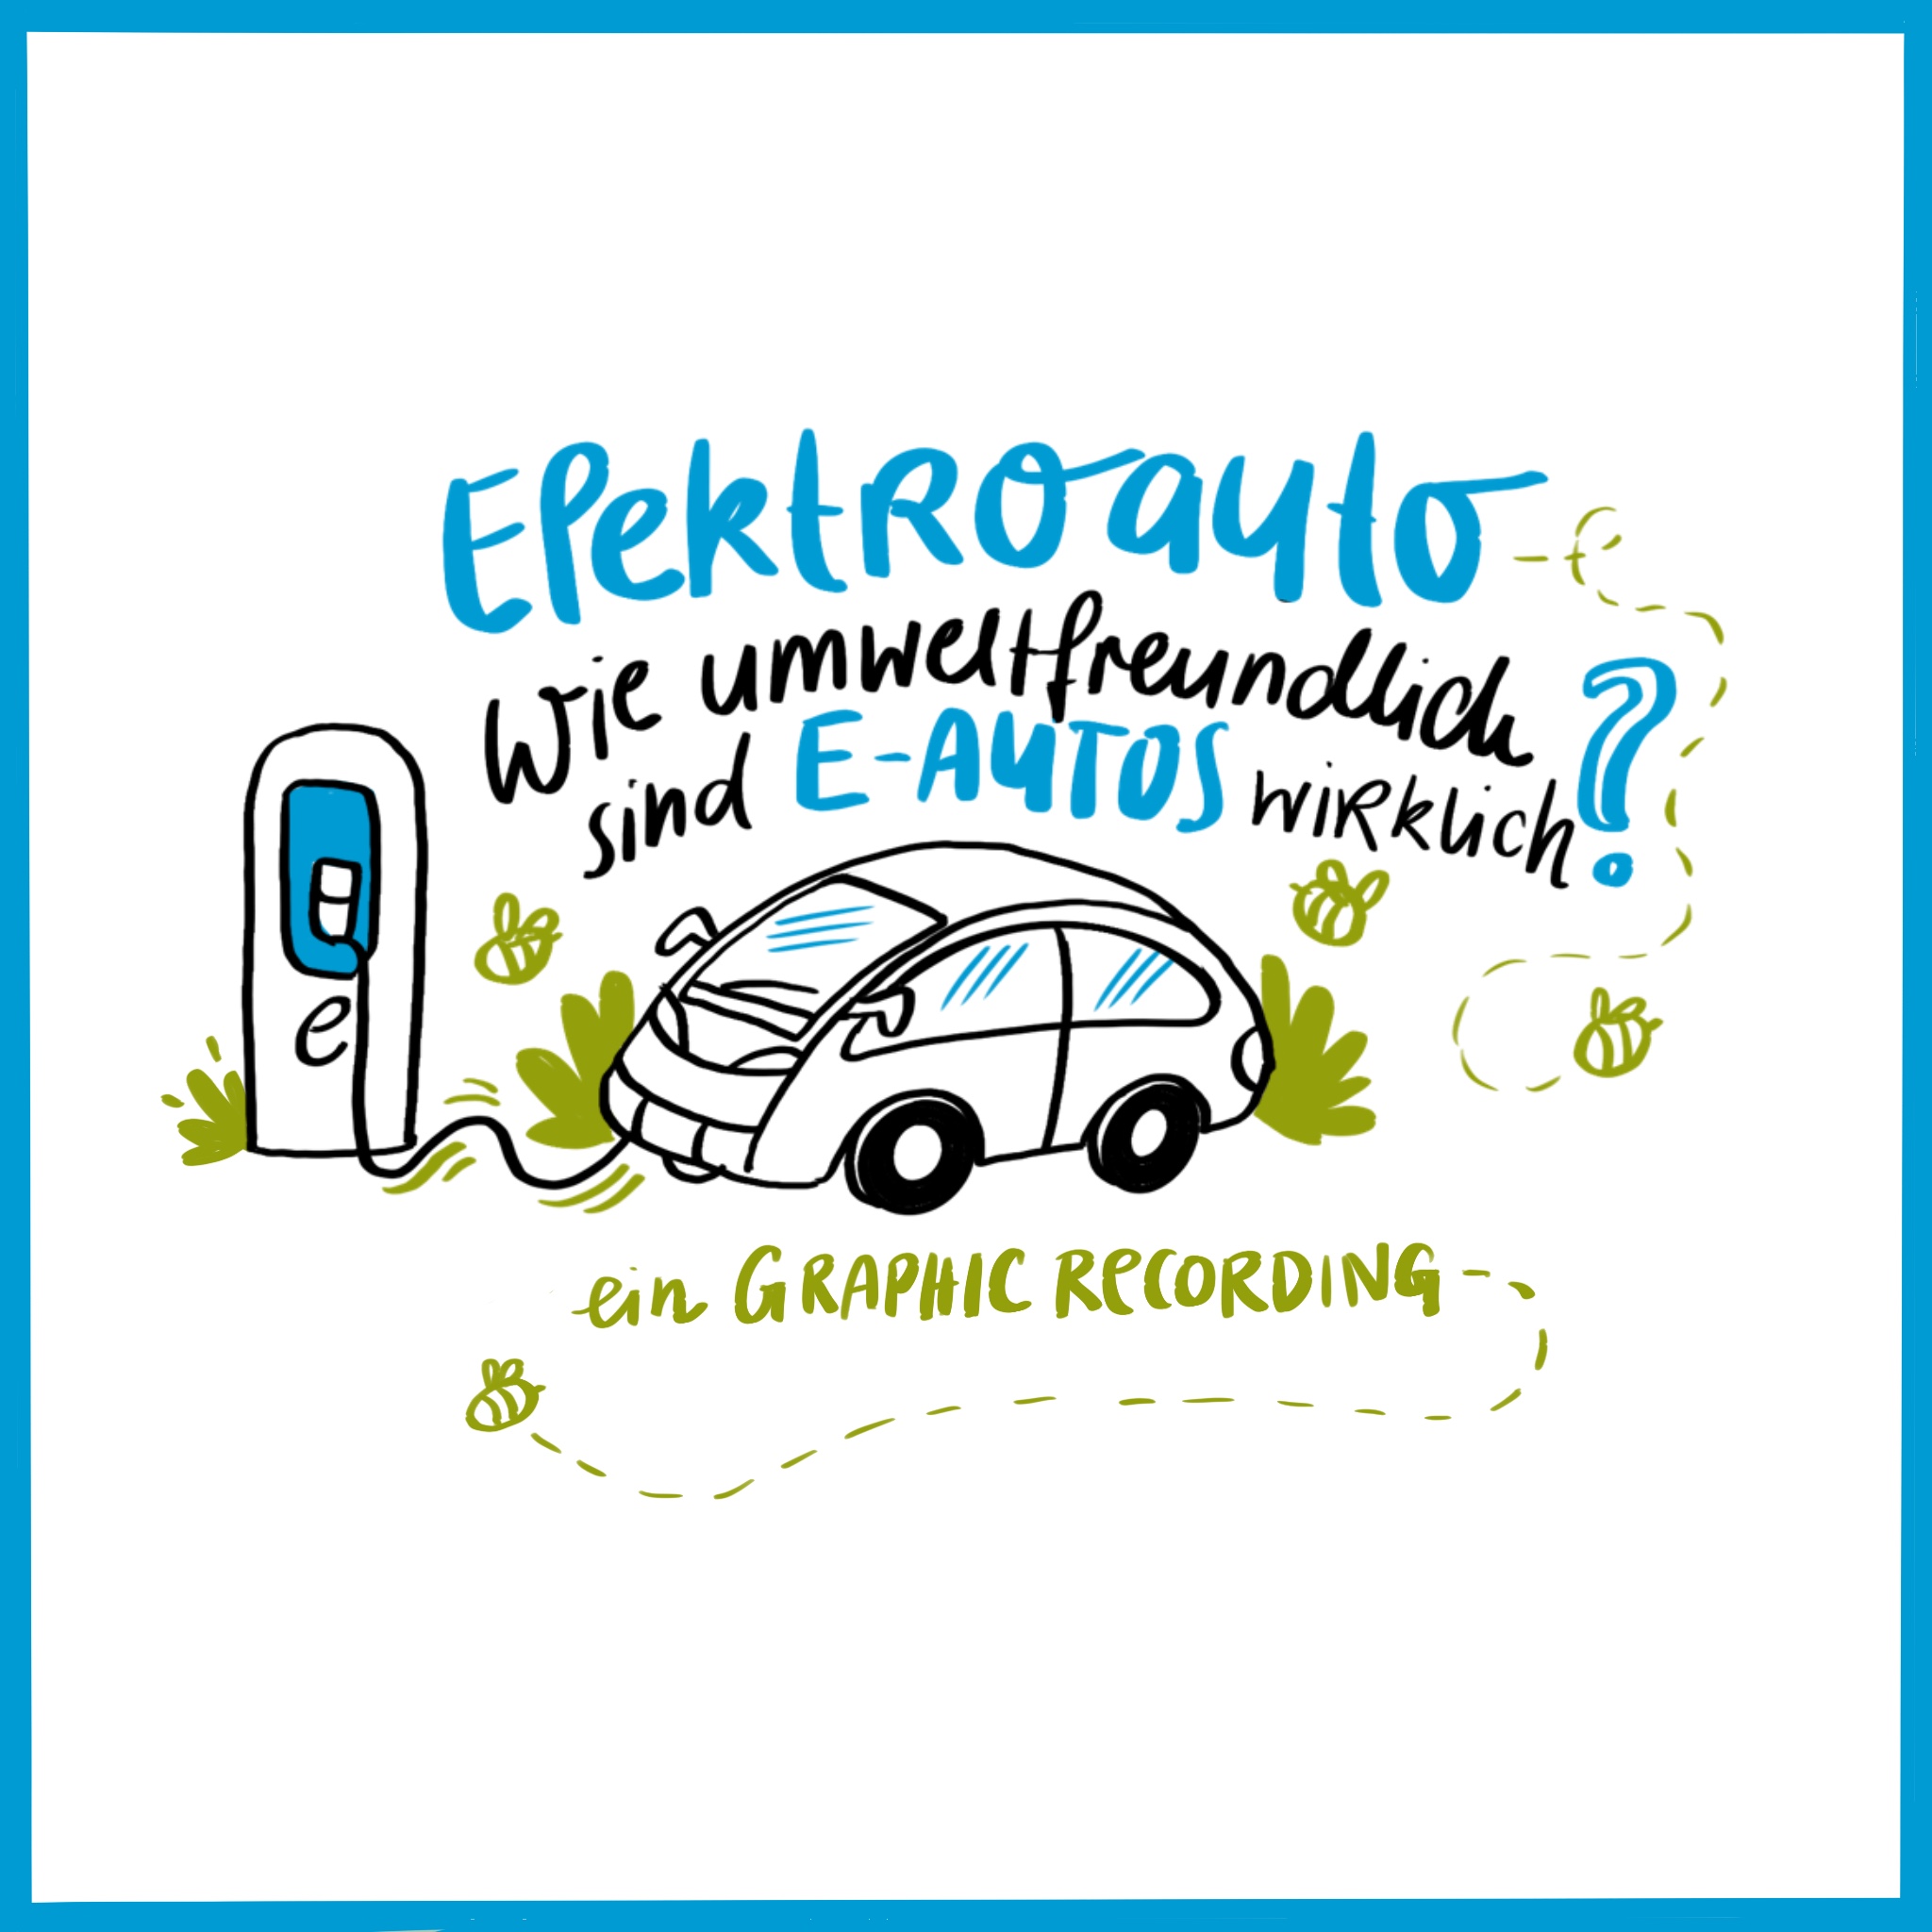 a graphic teaser about a graphic recording. Topic is about eco-friendly cars. doodle style with 2 colors.